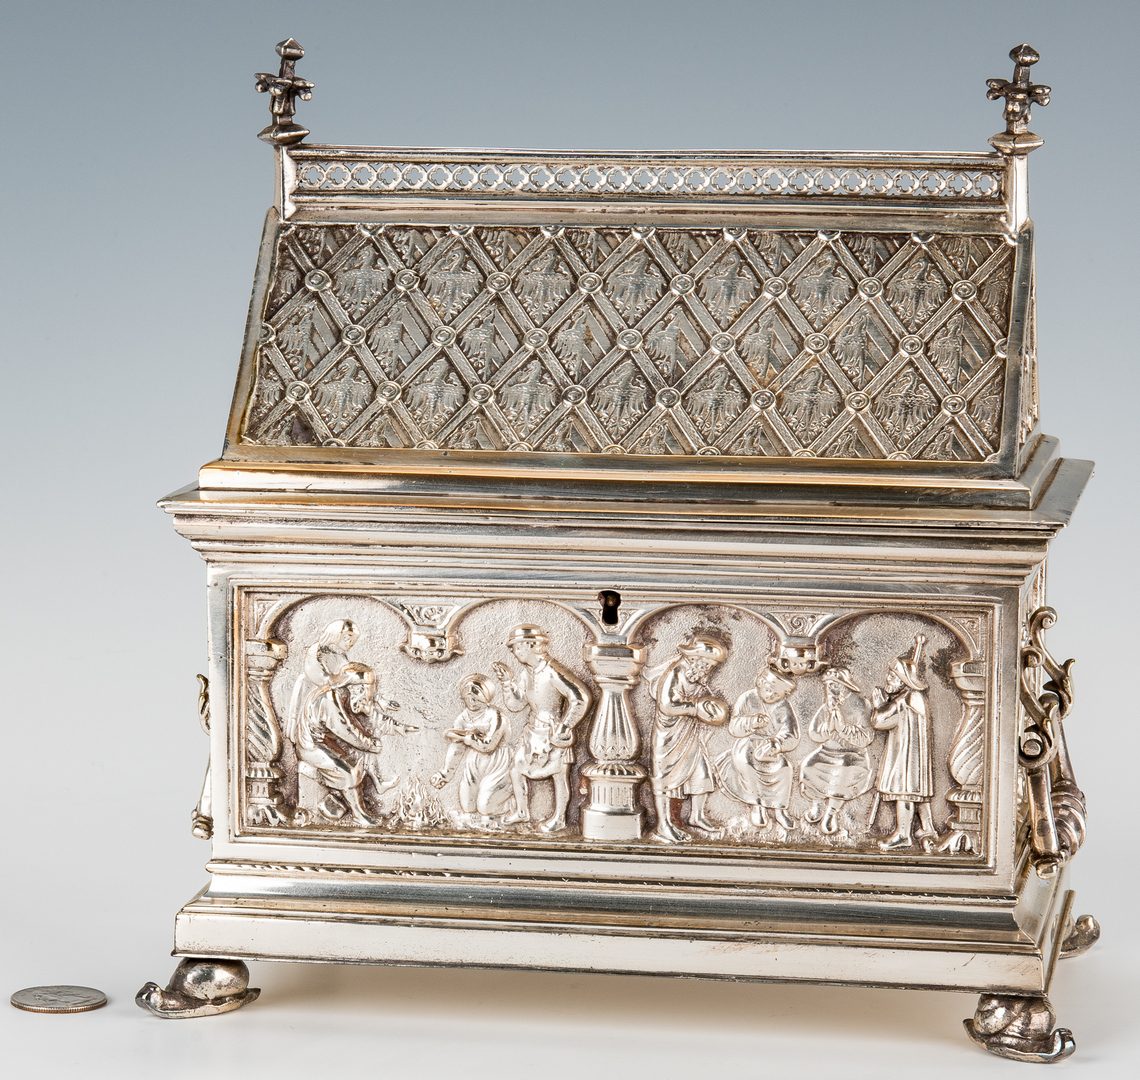 Lot 68: Silver Plated Reliquary or Money Box